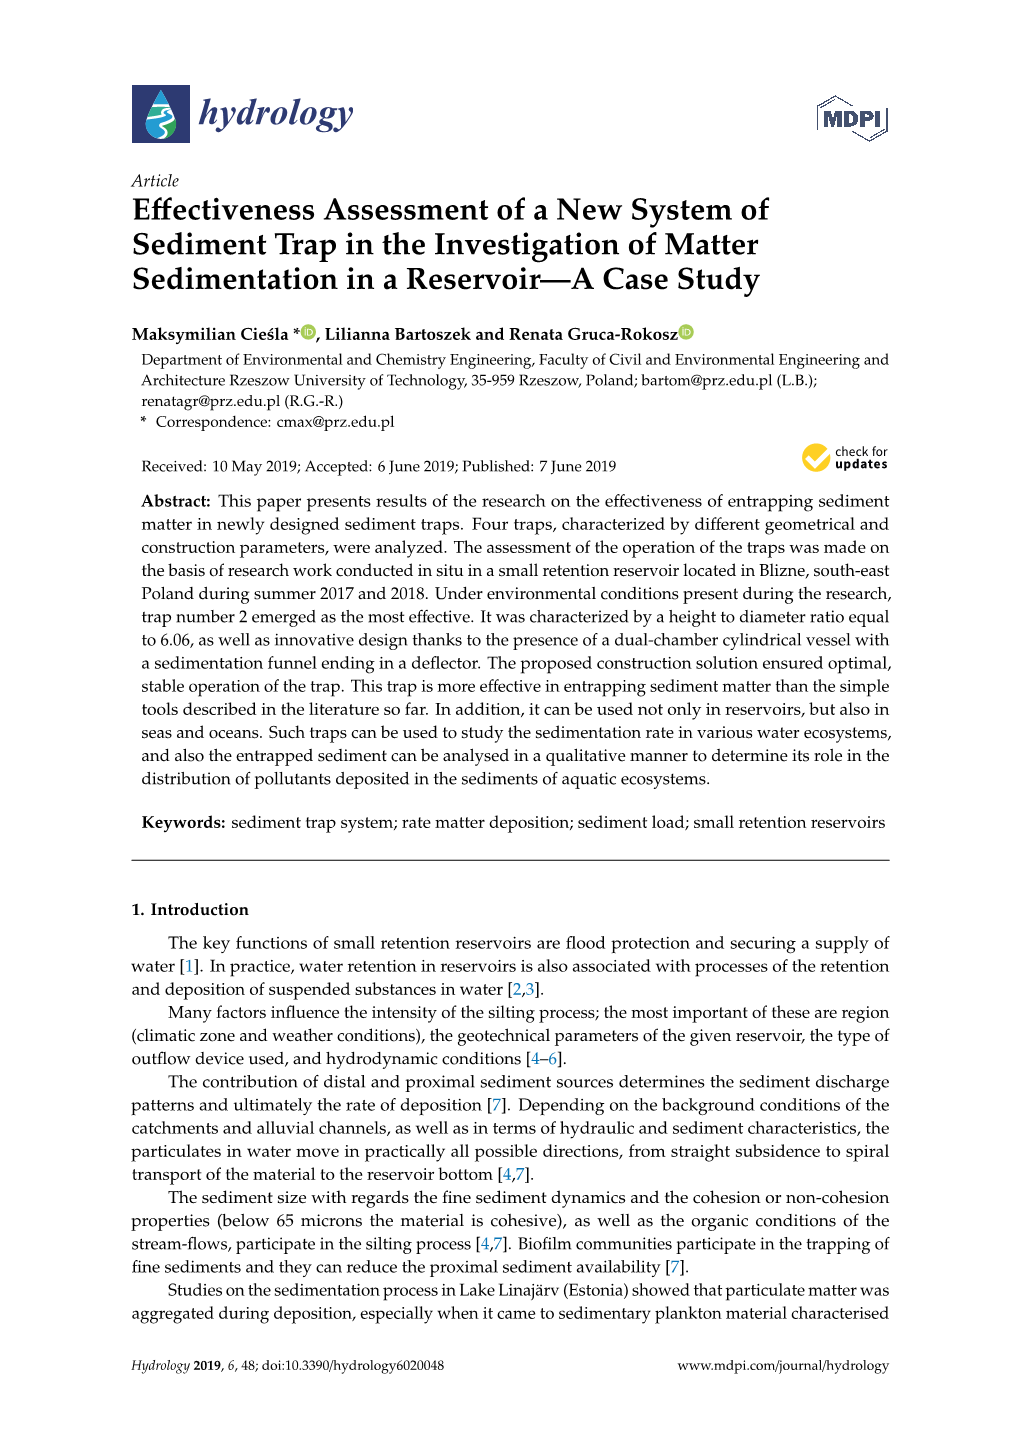 Effectiveness Assessment of a New System of Sediment Trap in The